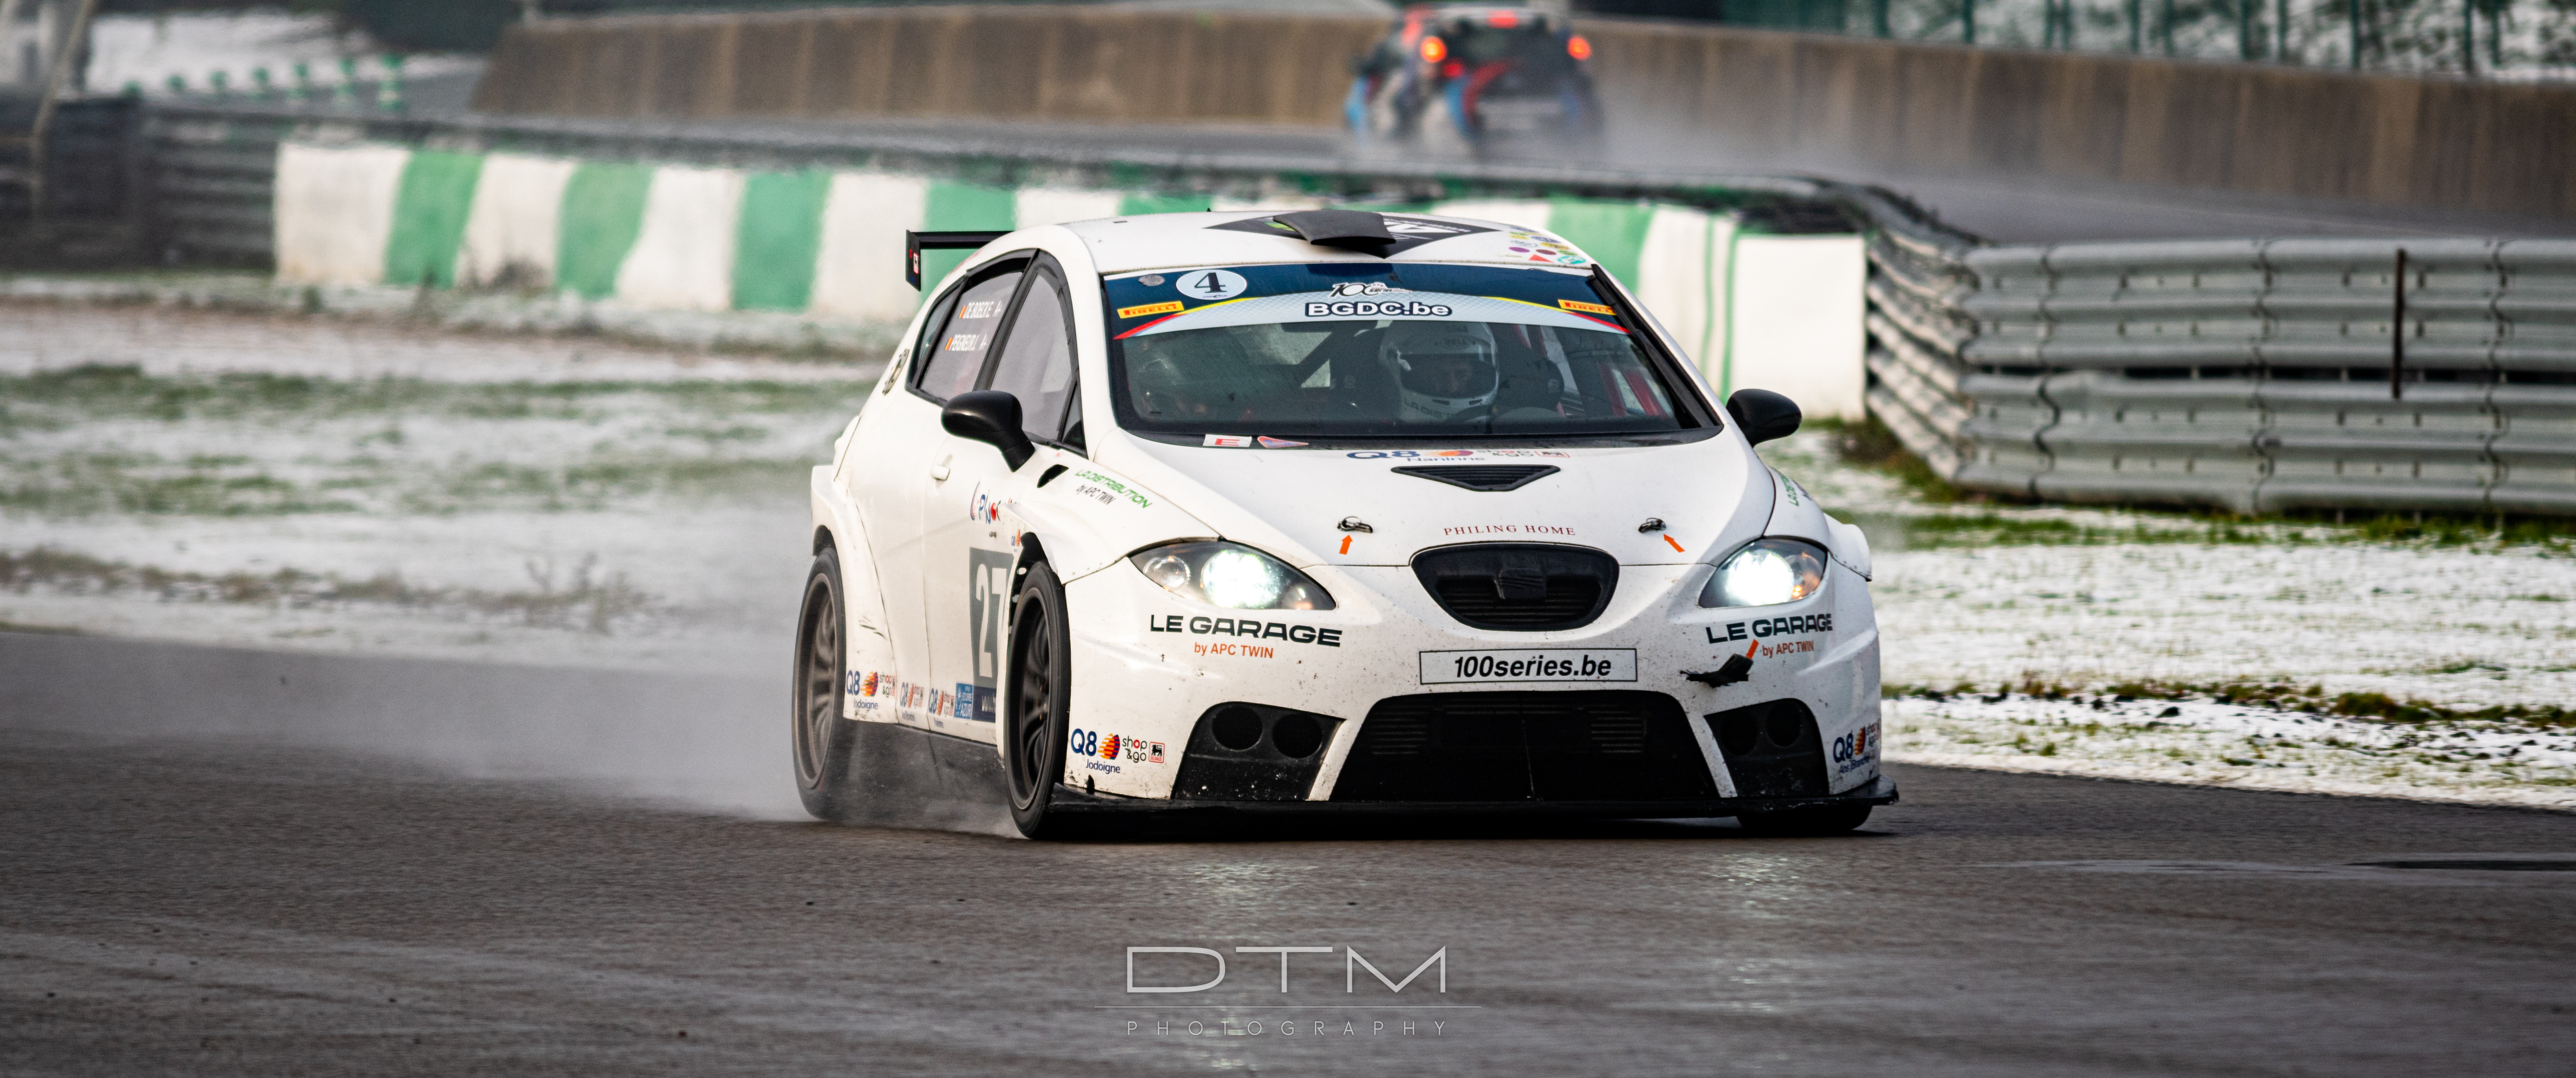 Circuit Jules Tacheny Seat Leon Seat BGDC Dtm Photography Car Front Angle View Headlights Race Track 5568x2331